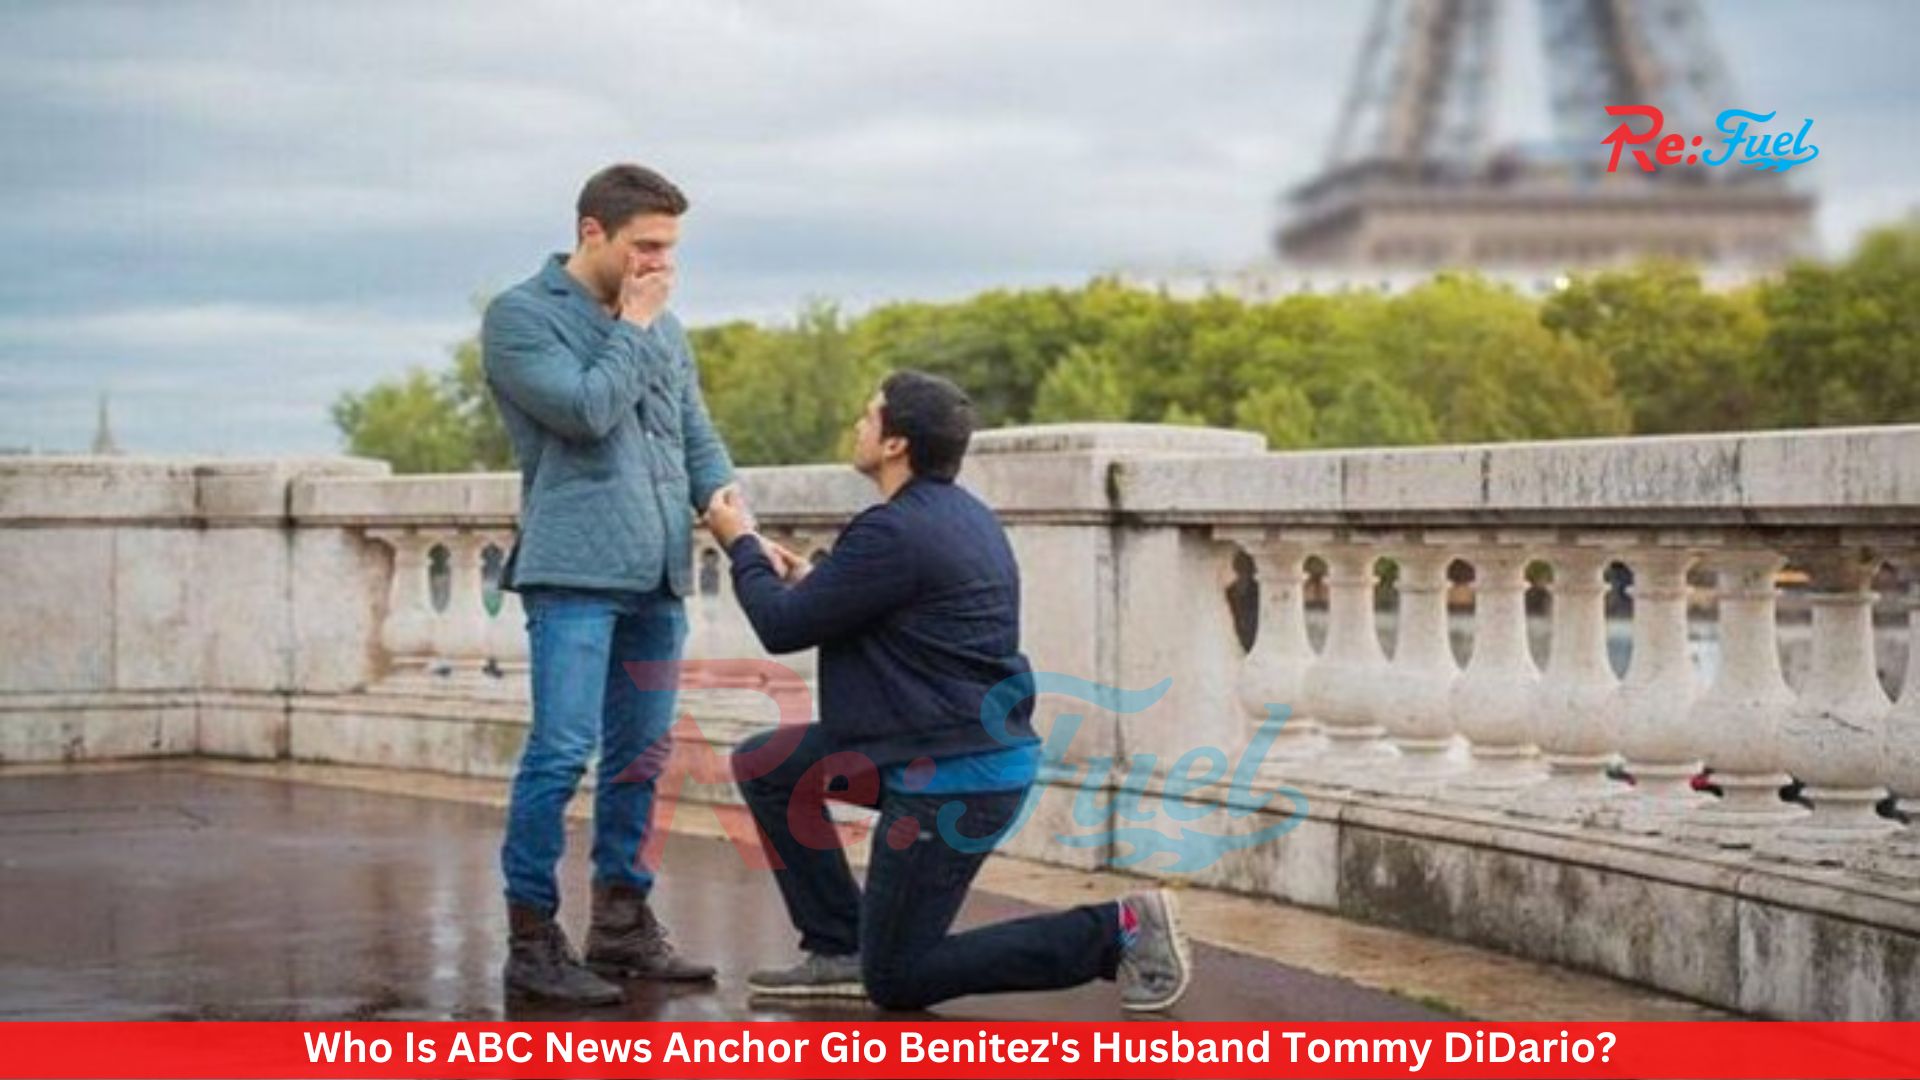 Who Is ABC News Anchor Gio Benitez's Husband Tommy DiDario?